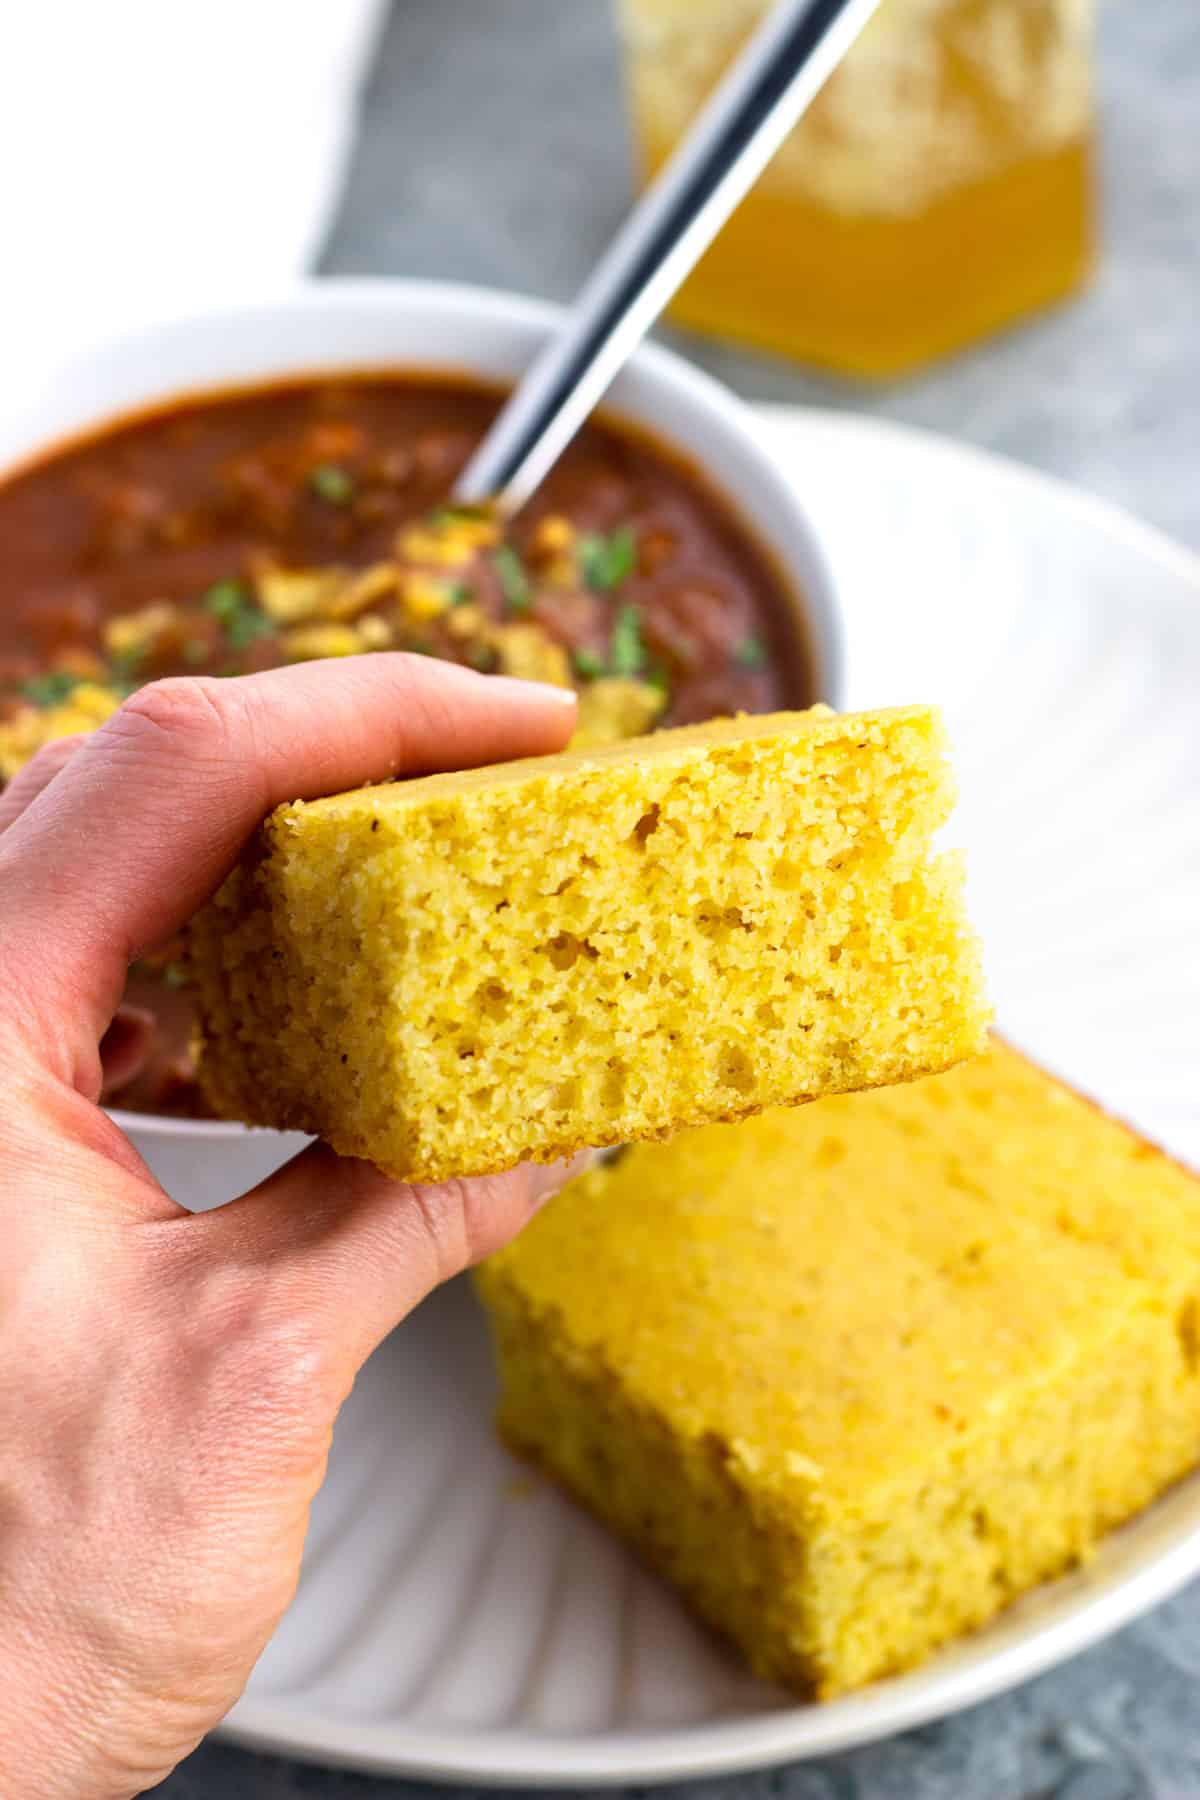 A hand holding a square of cornbread in front of a bowl of chili.